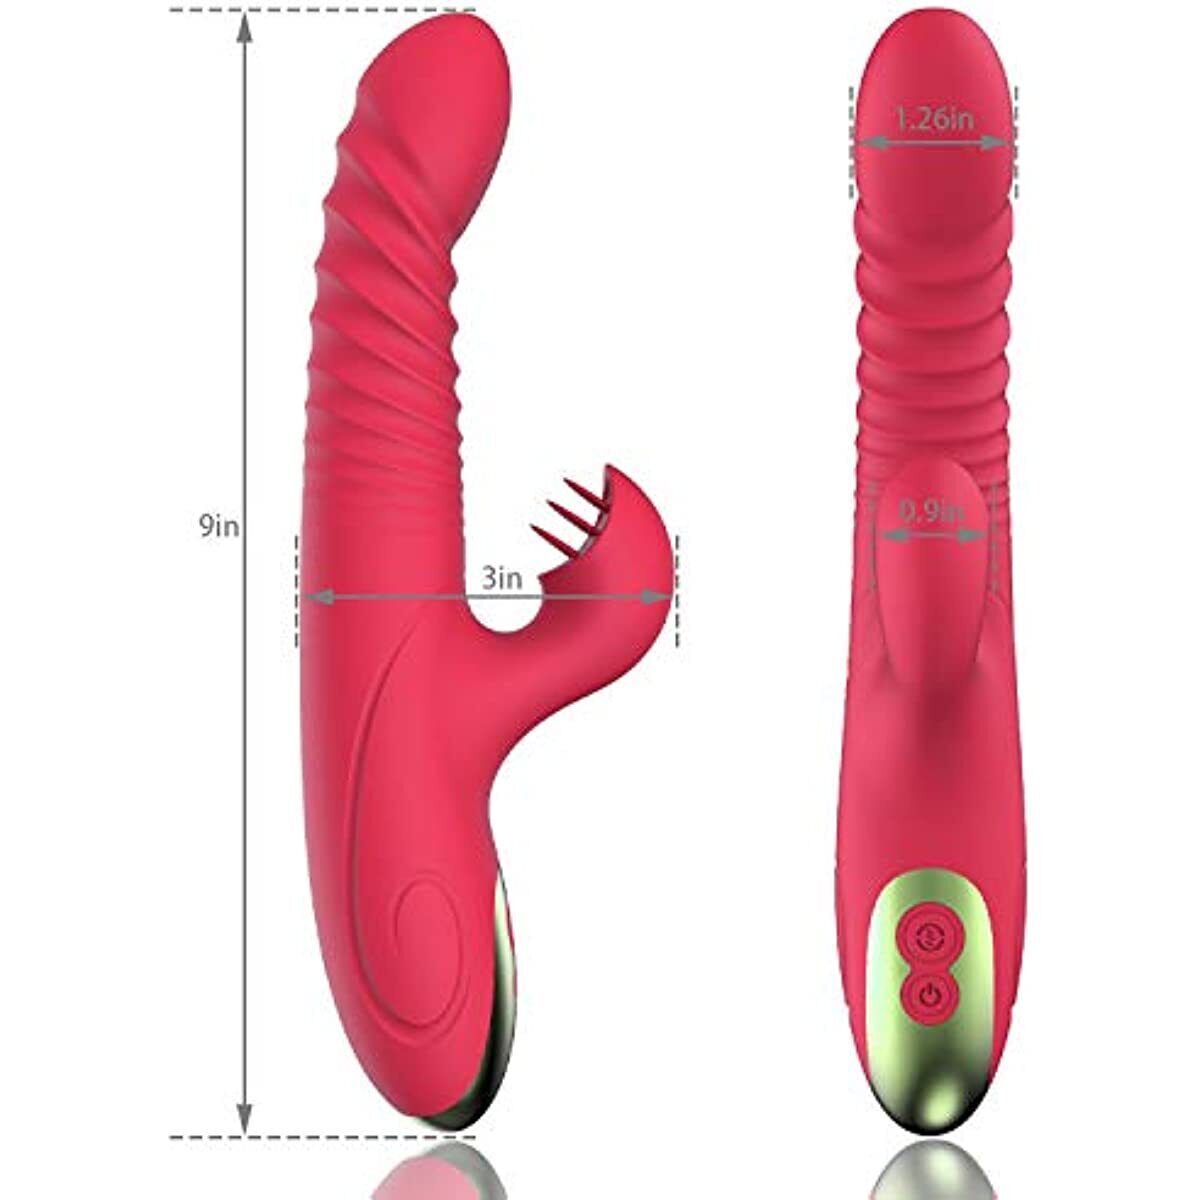 Rabbit Vibrator Sex Toy for Woman Vibrating Massager Waterproof USB Rechargeable